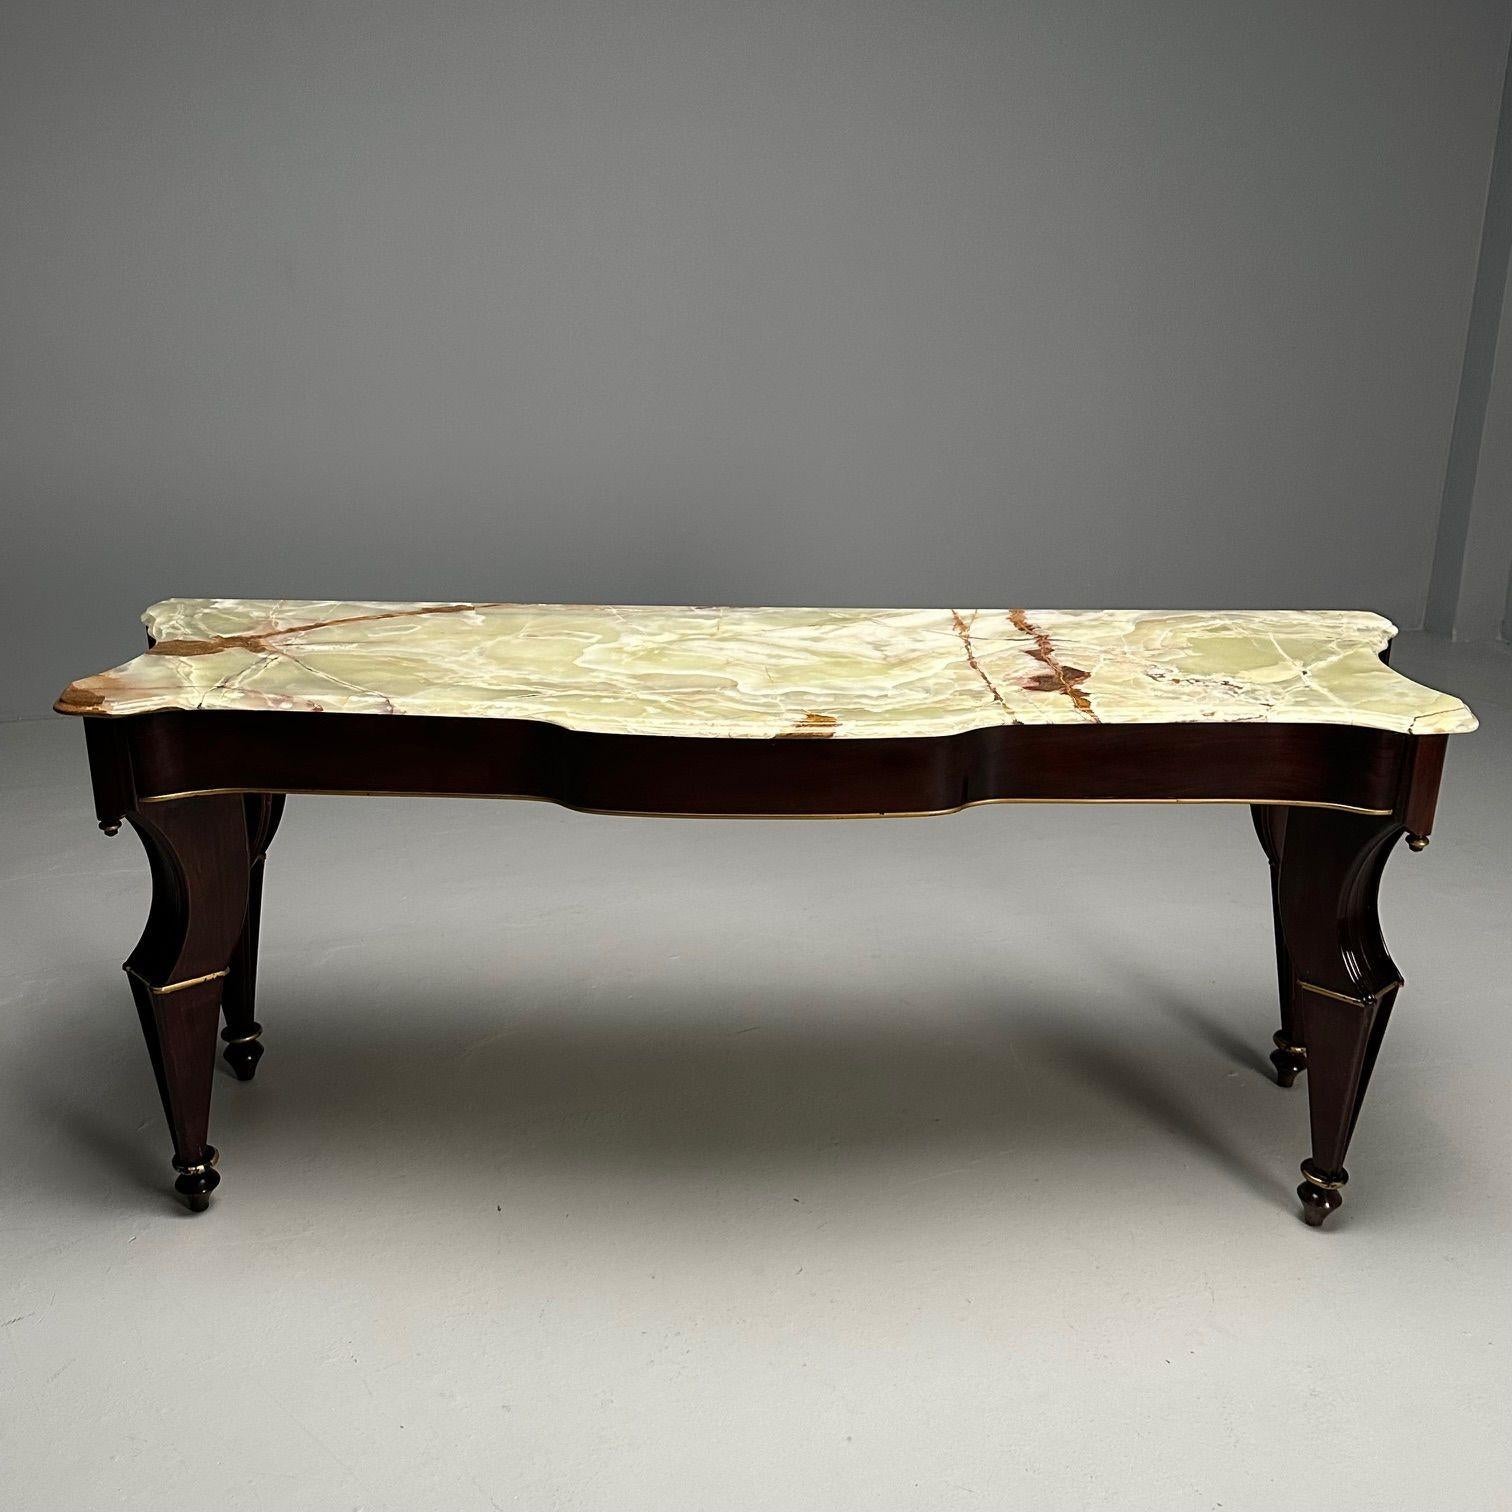 A grand French mahogany and parcel-gilt console table, circa 1940s, the shaped onyx marble atop a serpentine-shaped frieze, raised on four legs with fluted details. By Maison Jansen. Top having been professionally repaired many years ago. 